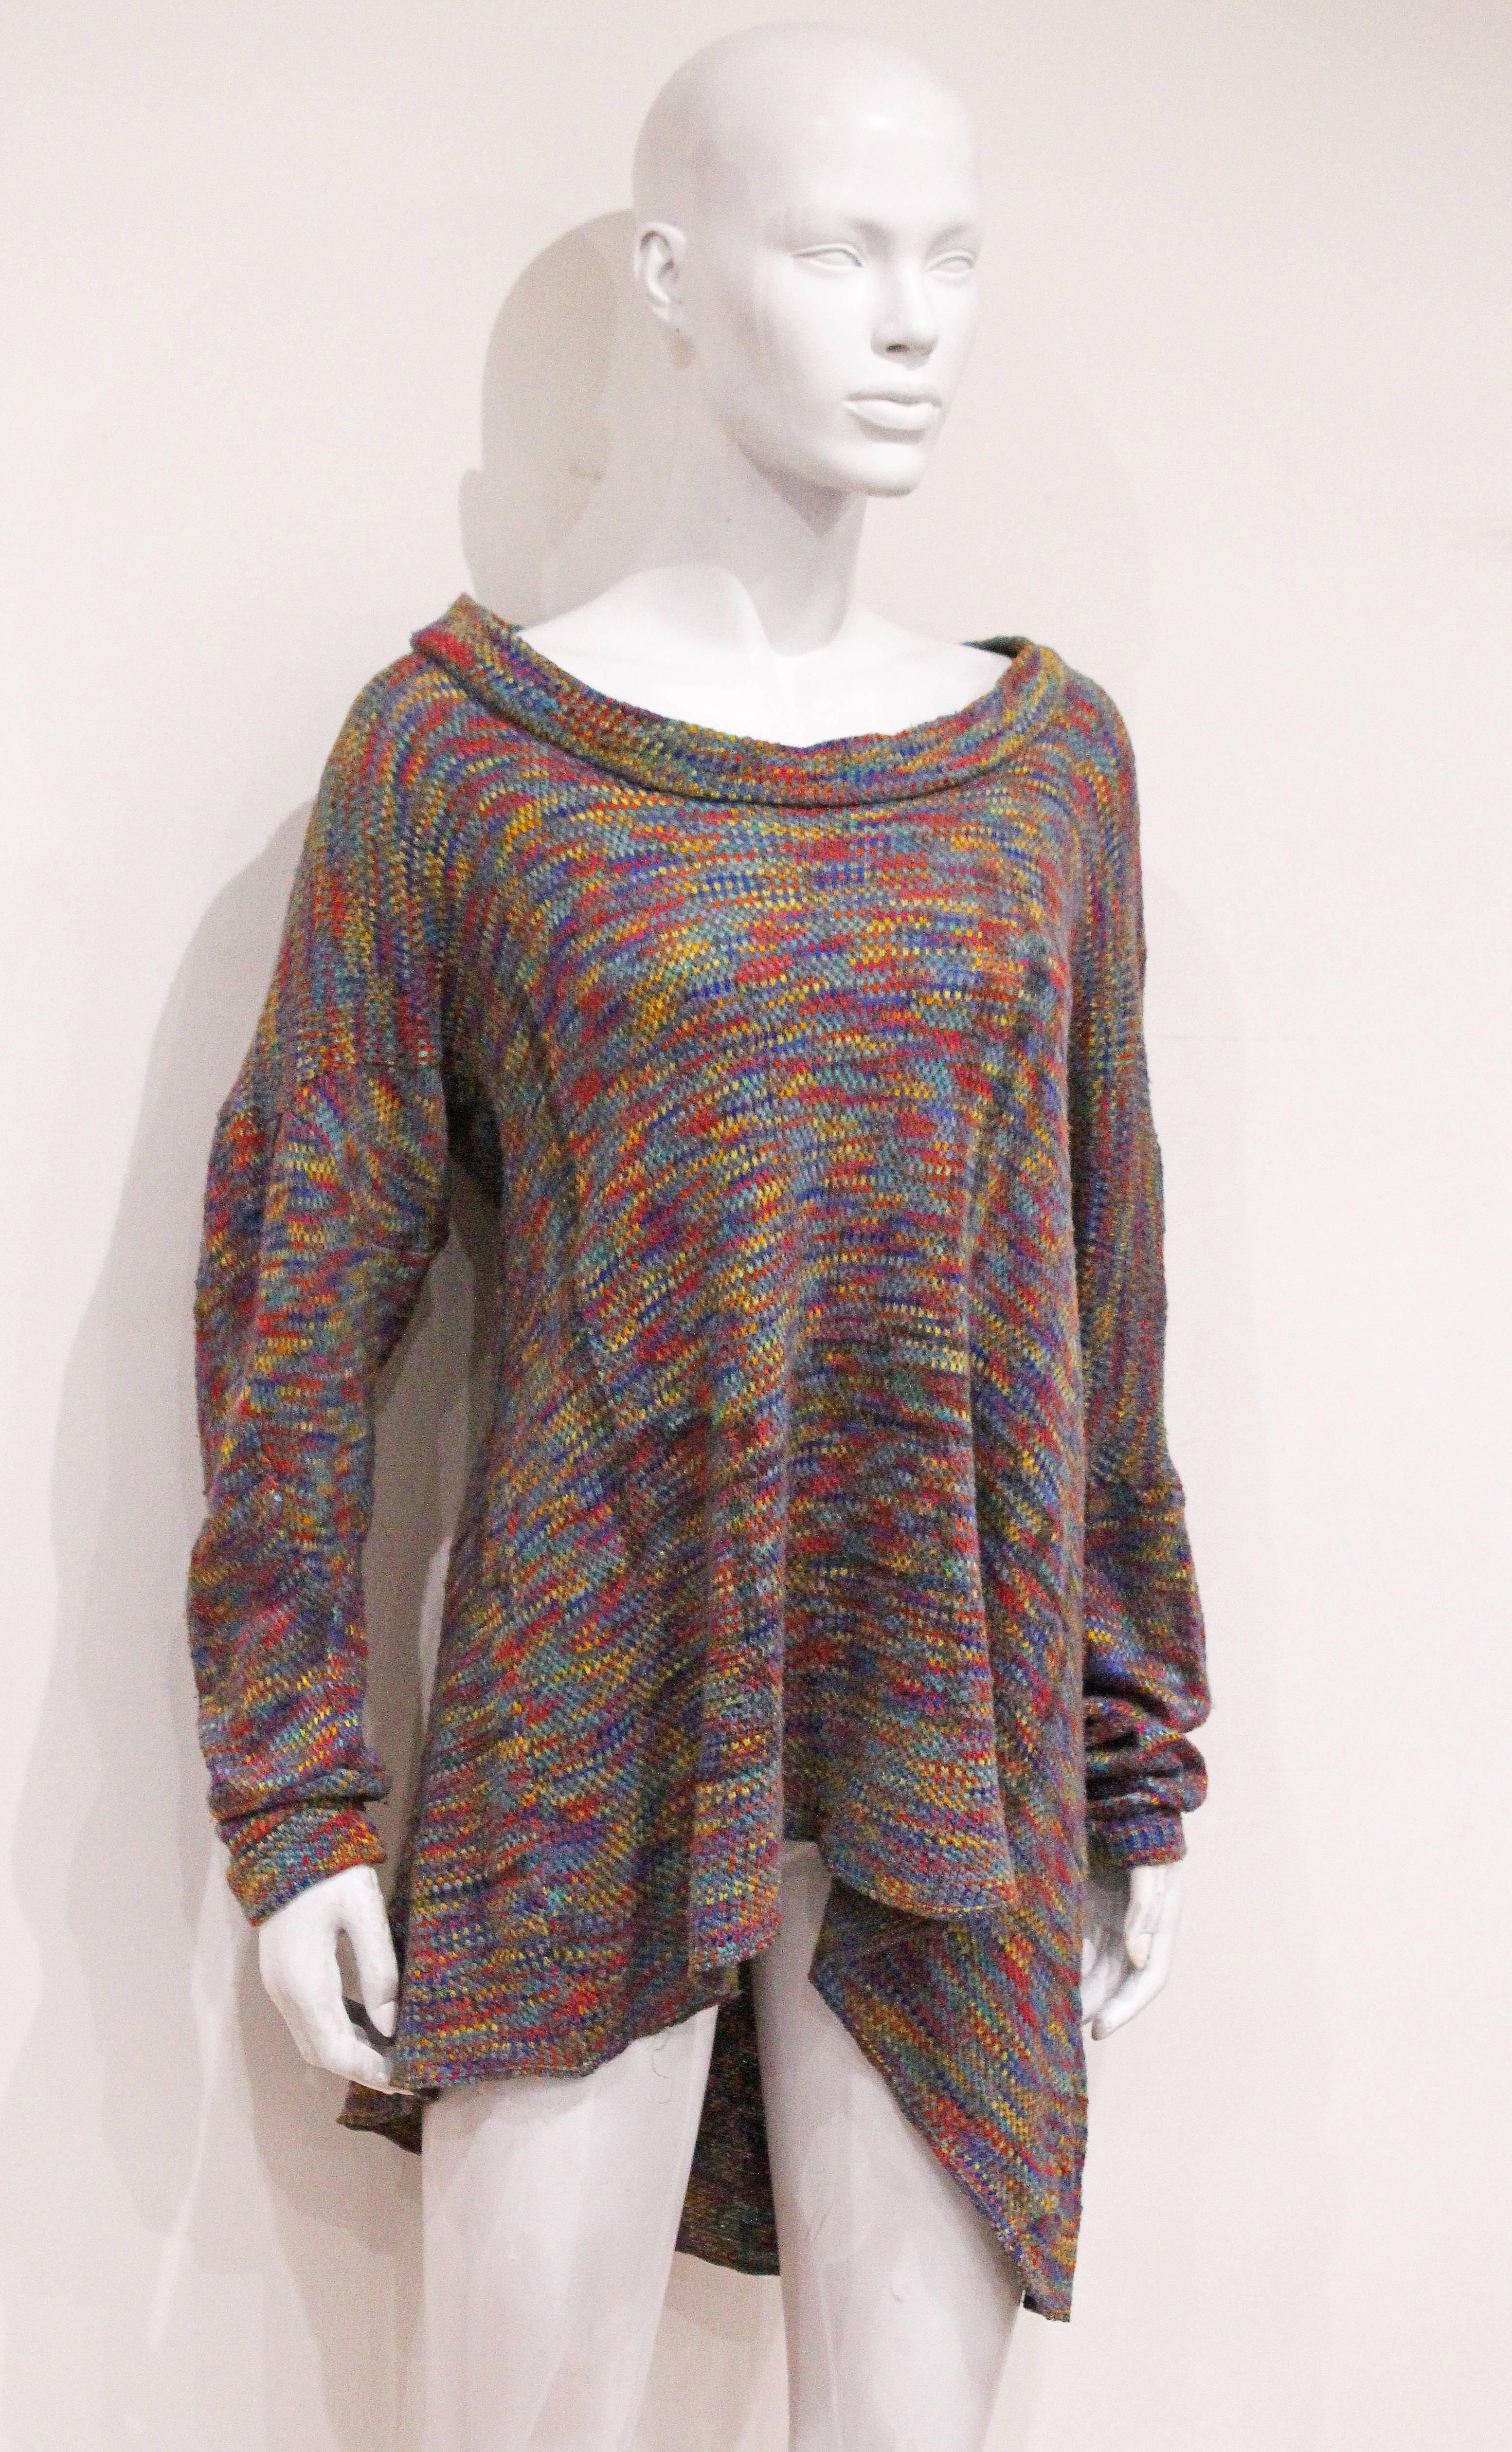 A fine and rare 'buffalo' jumper from the Nostalgia of Mud boutique by Vivienne Westwood and Malcolm McLaren. The jumper is in a multicoloured knit and is cut asymmetrically. 

M/L 